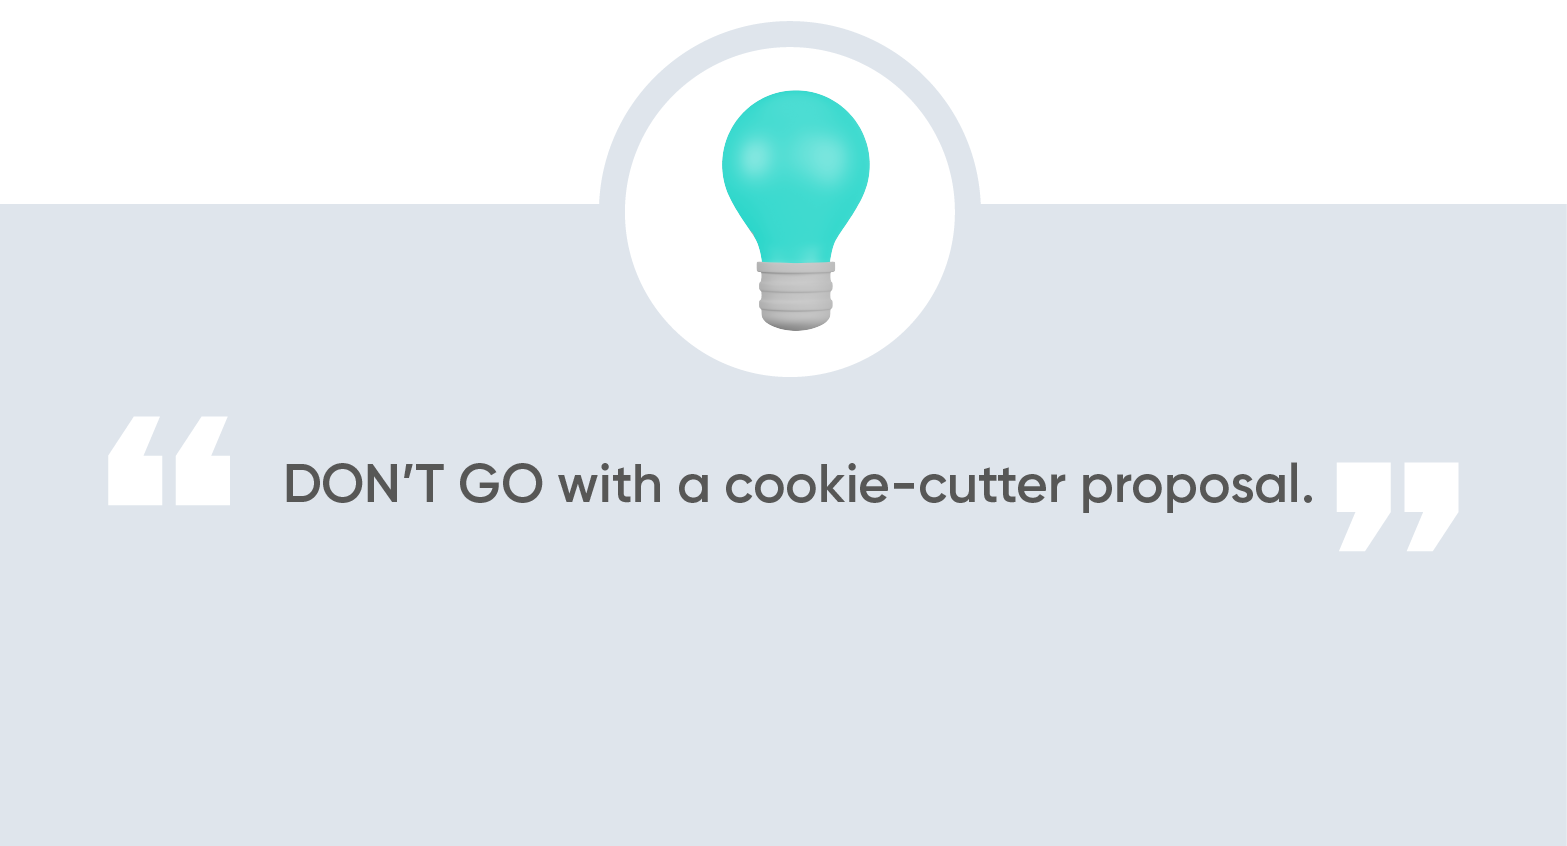 Don’t-go-with-a-cookie-cutter-proposal-Quote